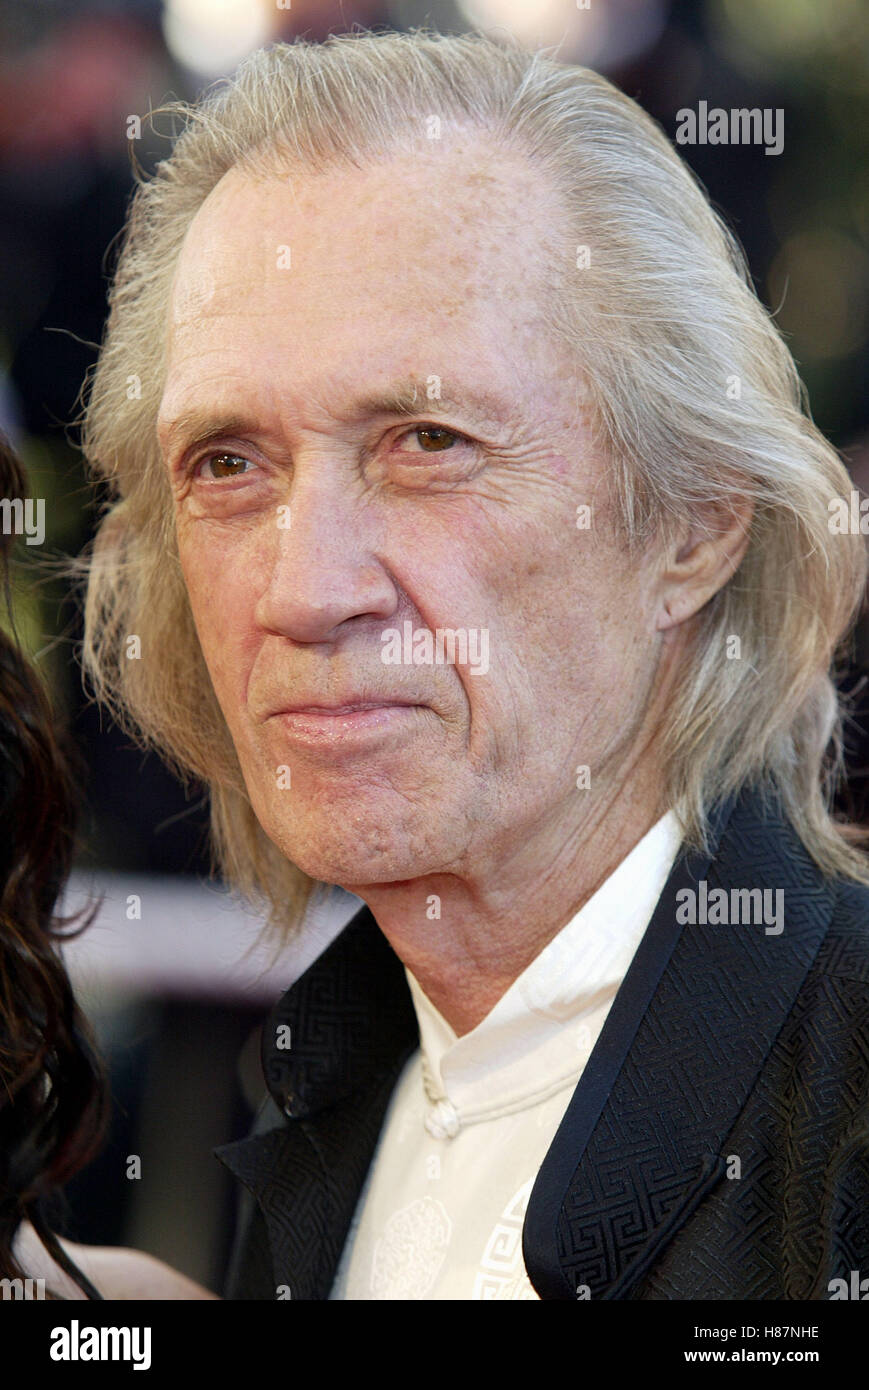 DAVID CARRADINE CANNES FILM FESTIVAL CANNES FRANCE 19 May 2003 Stock Photo